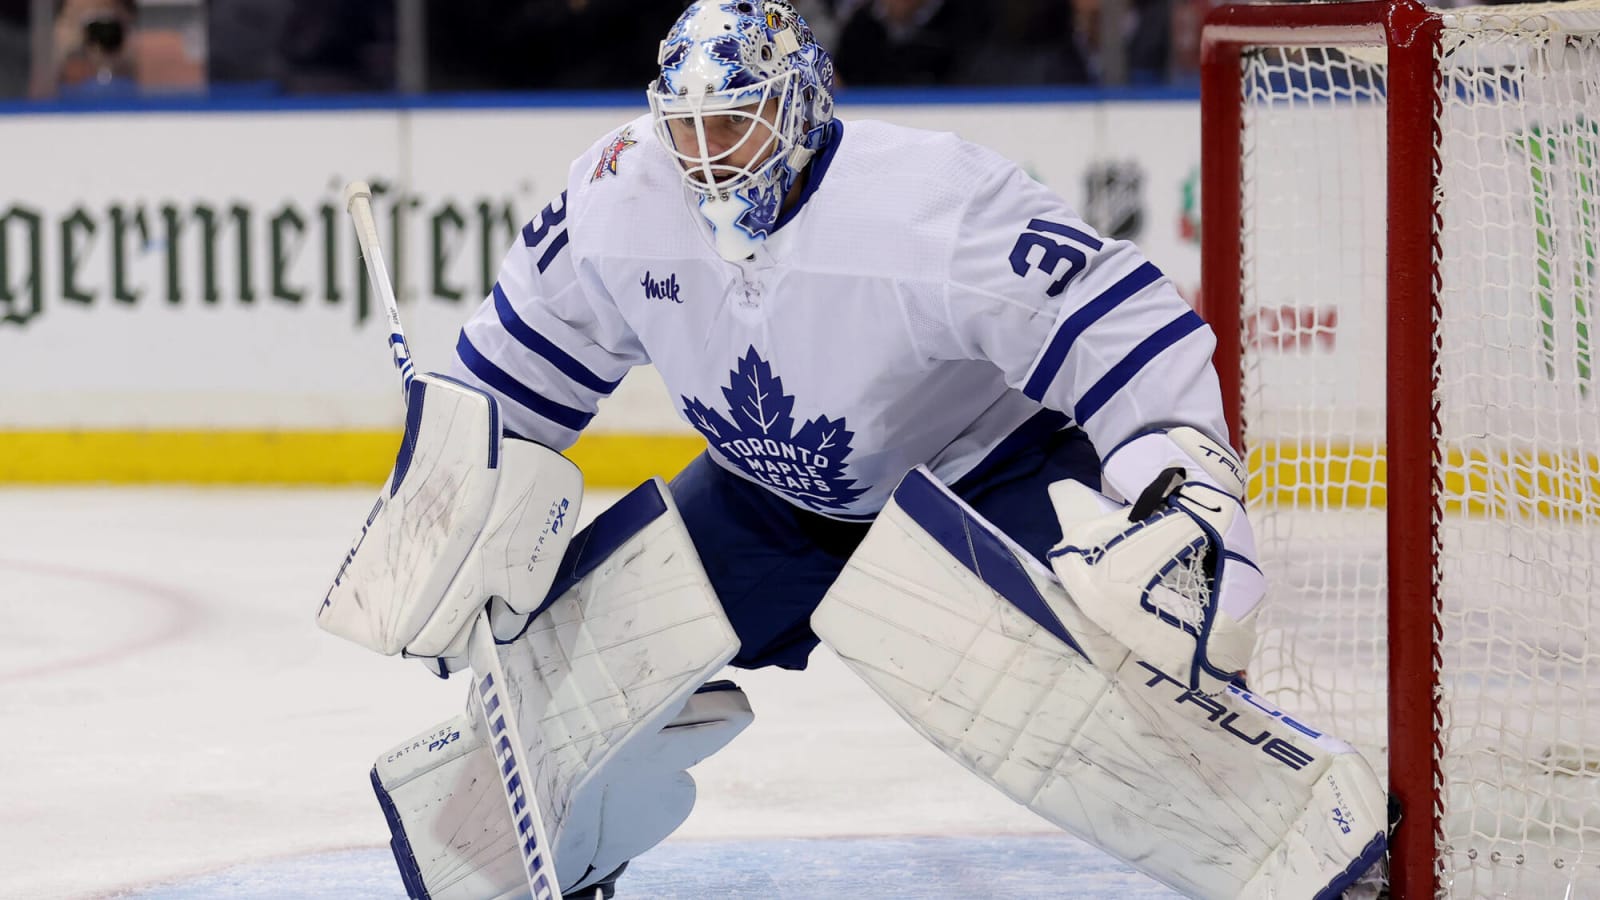 Martin Jones gets the start again as Maple Leafs close out back-to-back against Ducks